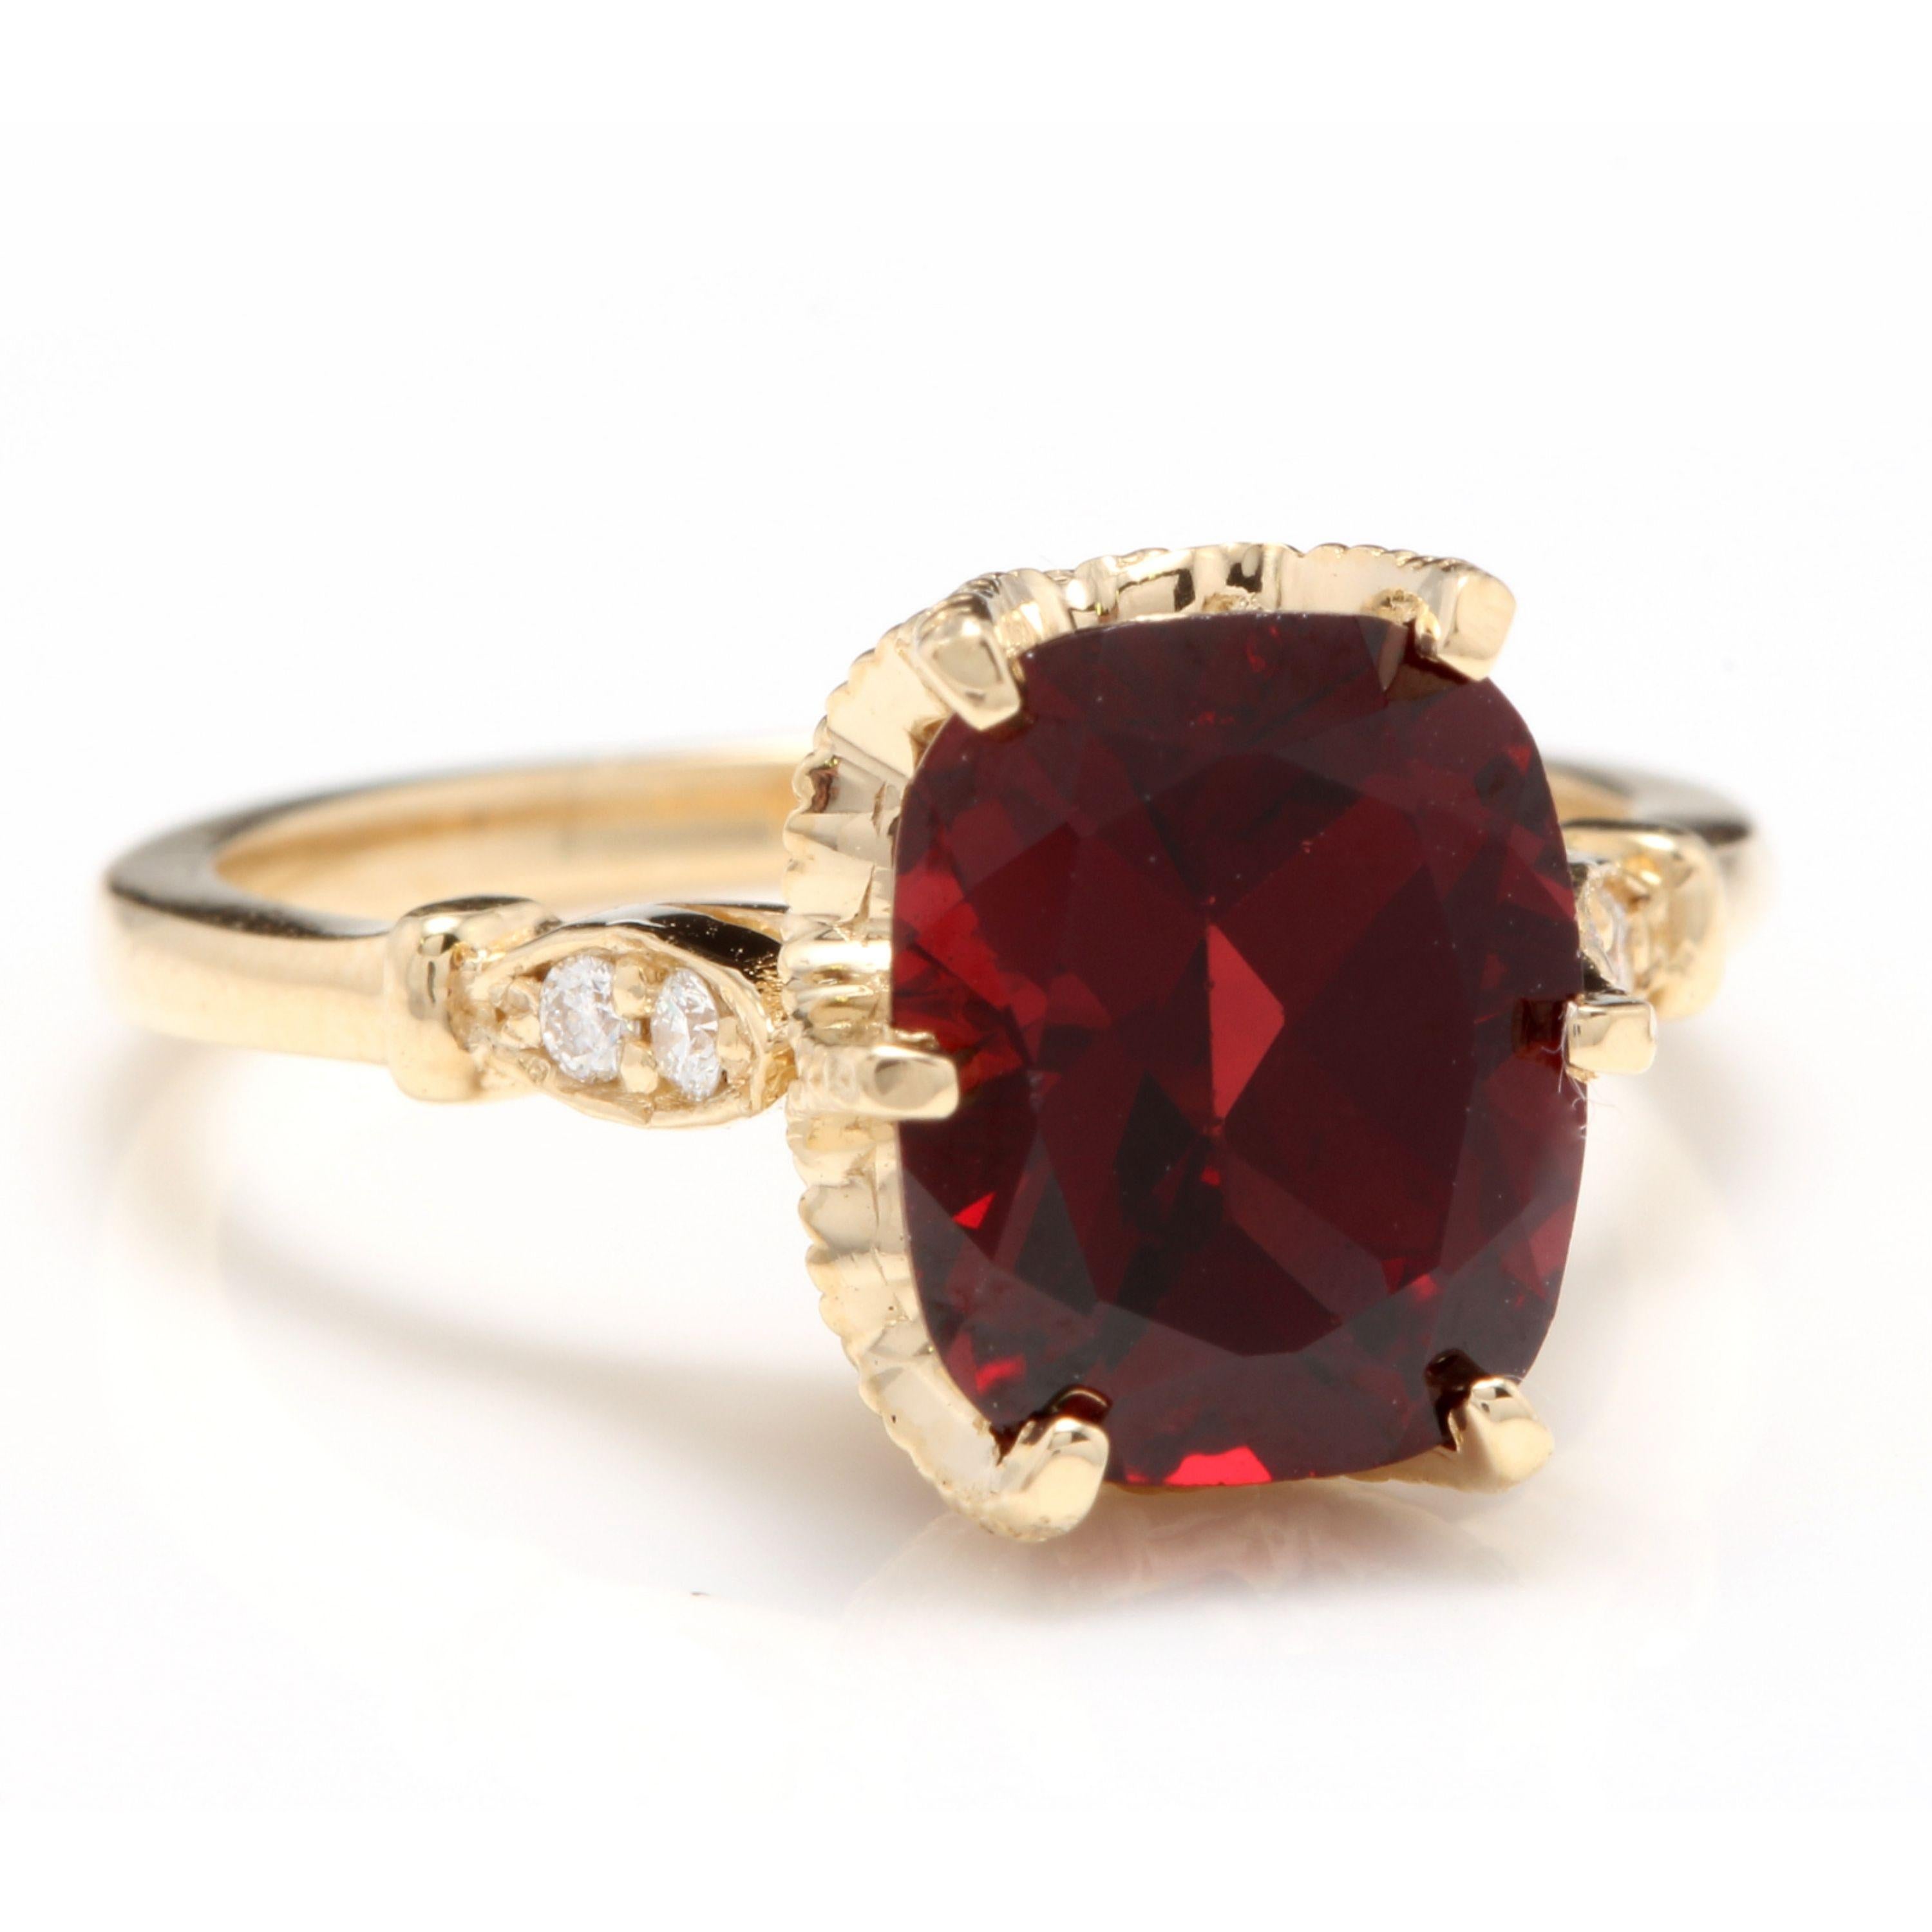 3.68 Carats Natural Garnet and Diamond 14K Solid Yellow Gold Ring

Total Natural Cushion Shaped Garnet Weights: Approx. 3.60 Carats

Garnet Measures: Approx. 10mm x 8mm

Natural Round Diamonds Weight: Approx. 0.08 Carats (color G-H / Clarity